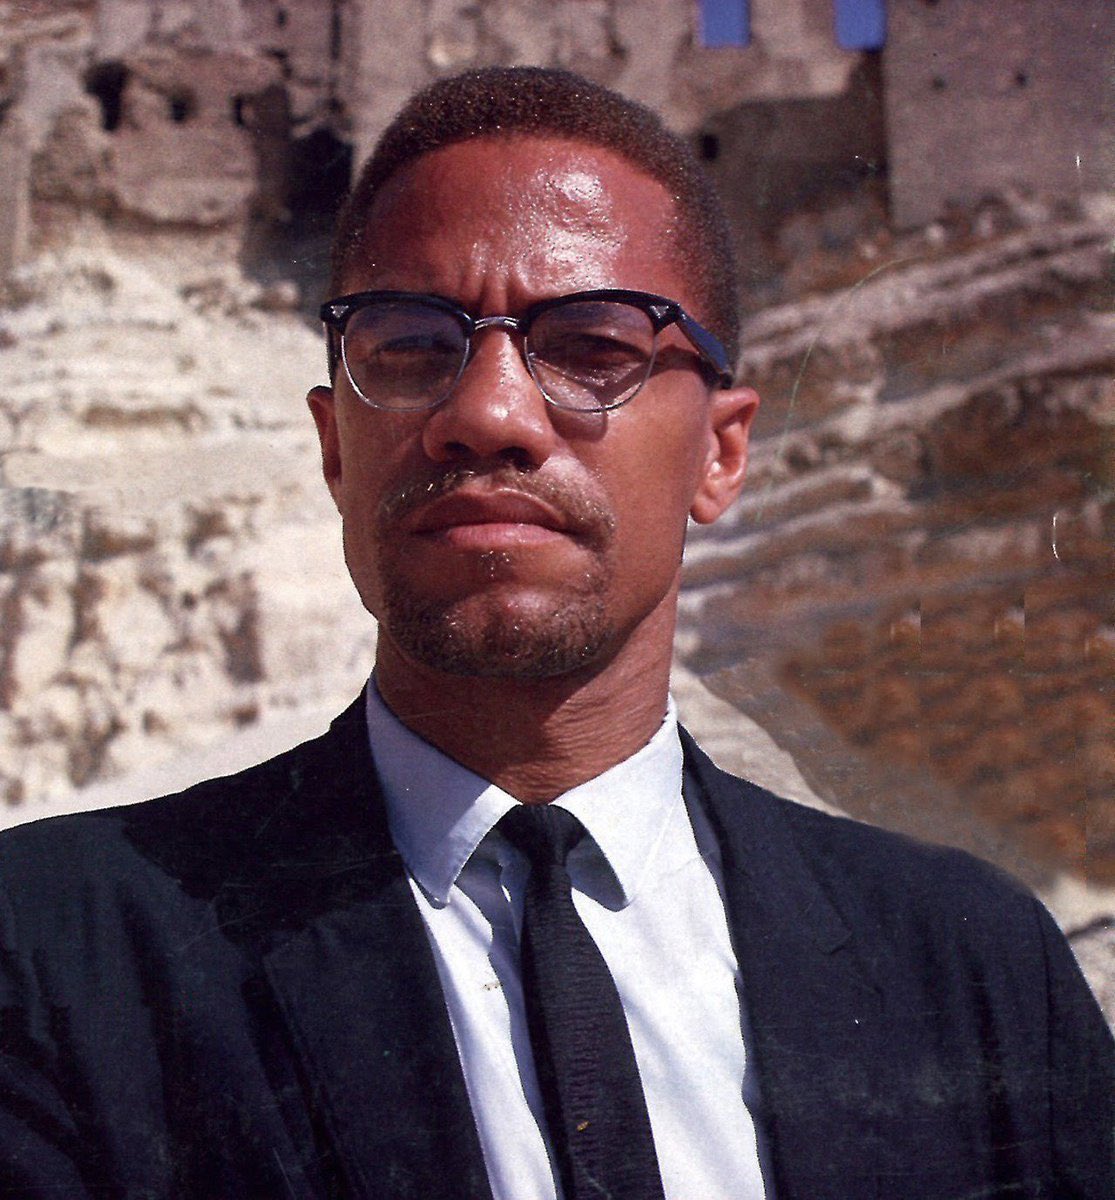 #37: Malcolm X (Part 3)Another critical piece left out was that Malcolm was poisoned by the US while visiting Cairo in 1964. He said CIA agents made their presence obvious & that he actually recognized his waiter as someone he saw in NY. He barely survived by a stomach pumping